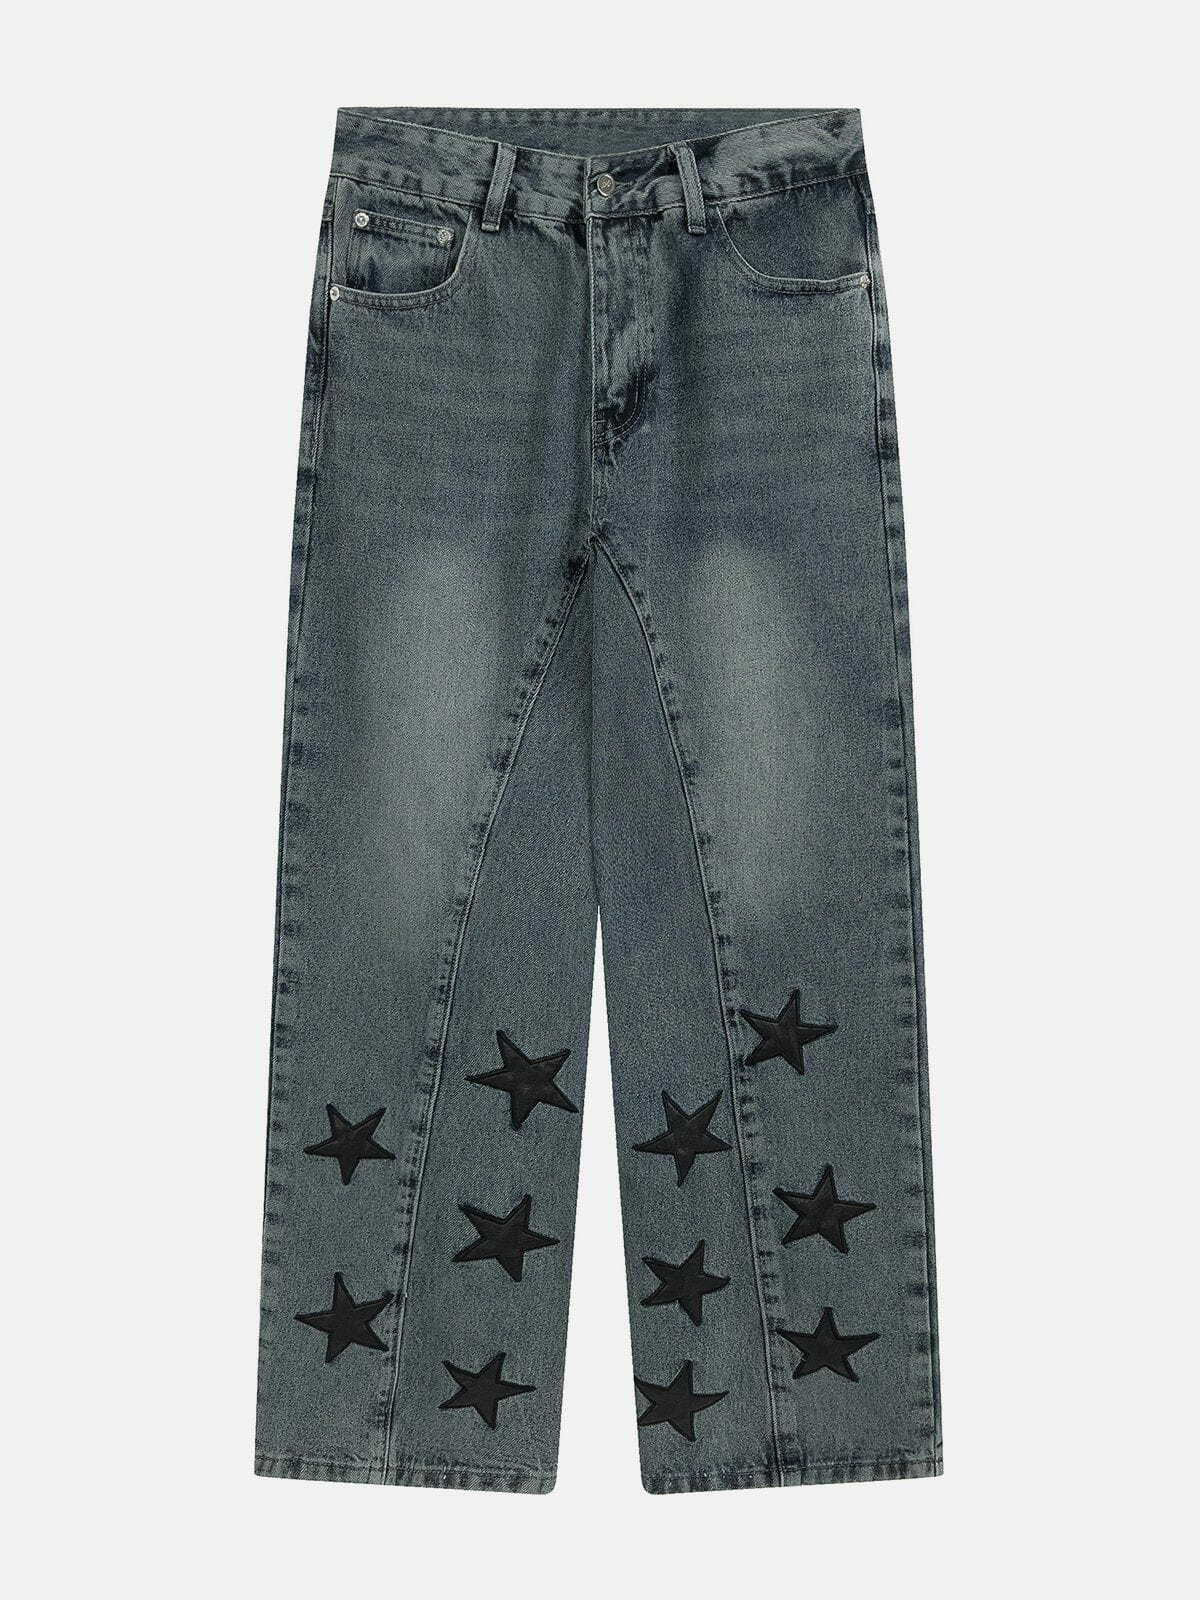 y2k star embroidered jeans retro edge & streetwear chic 7182